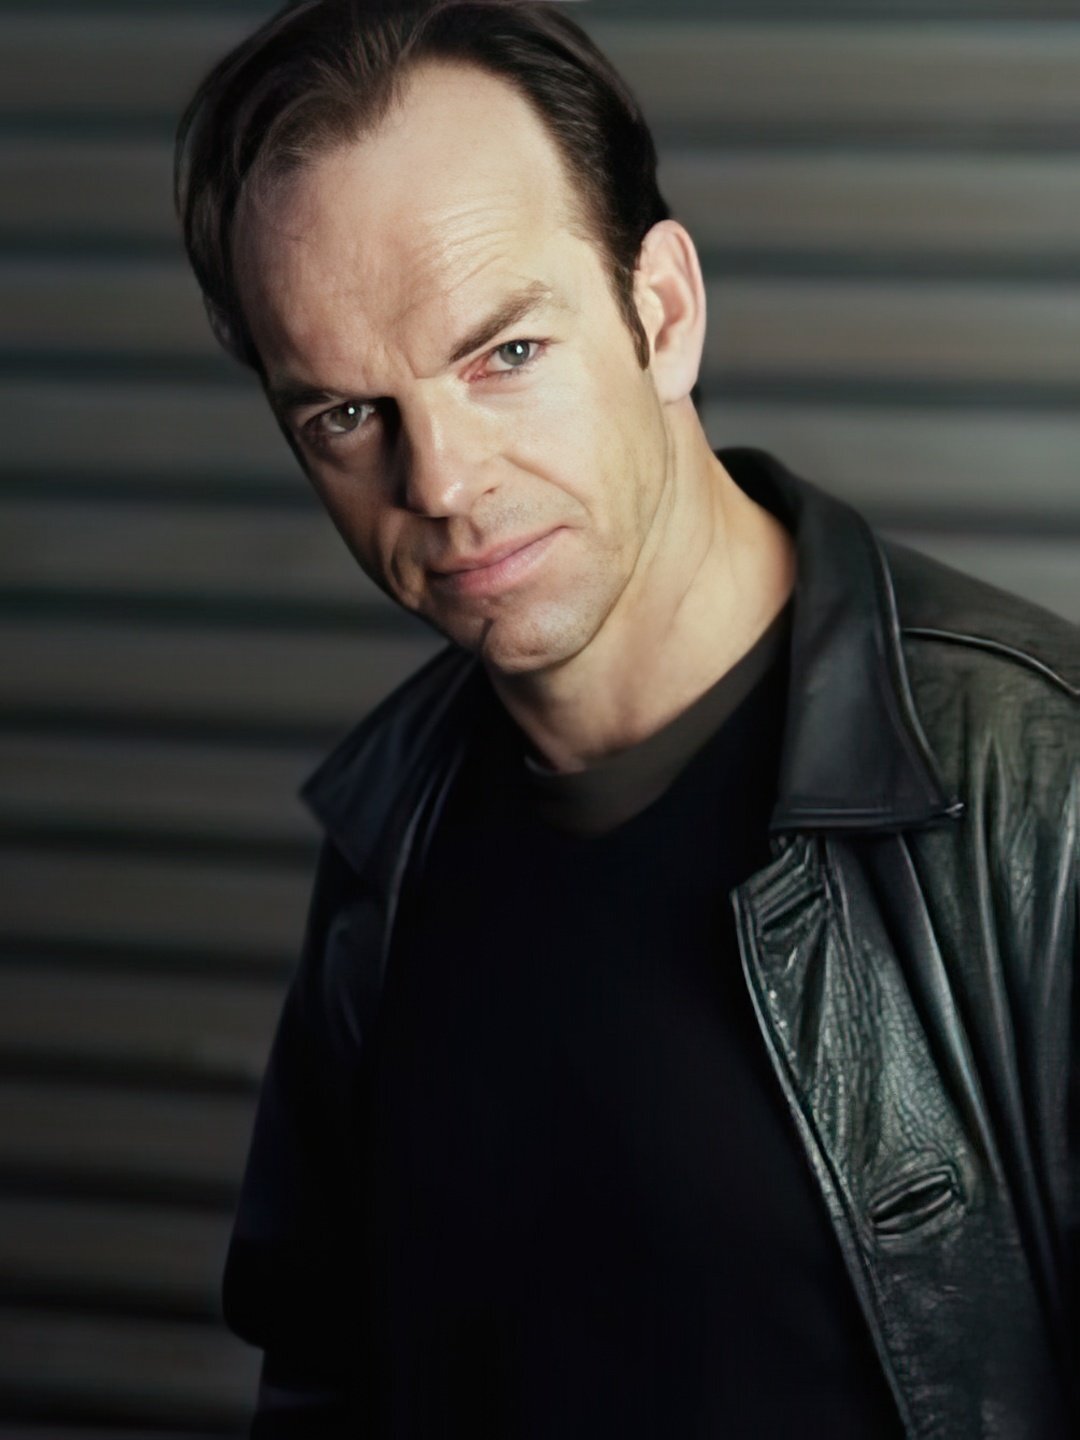 Hugo Weaving who is his mother